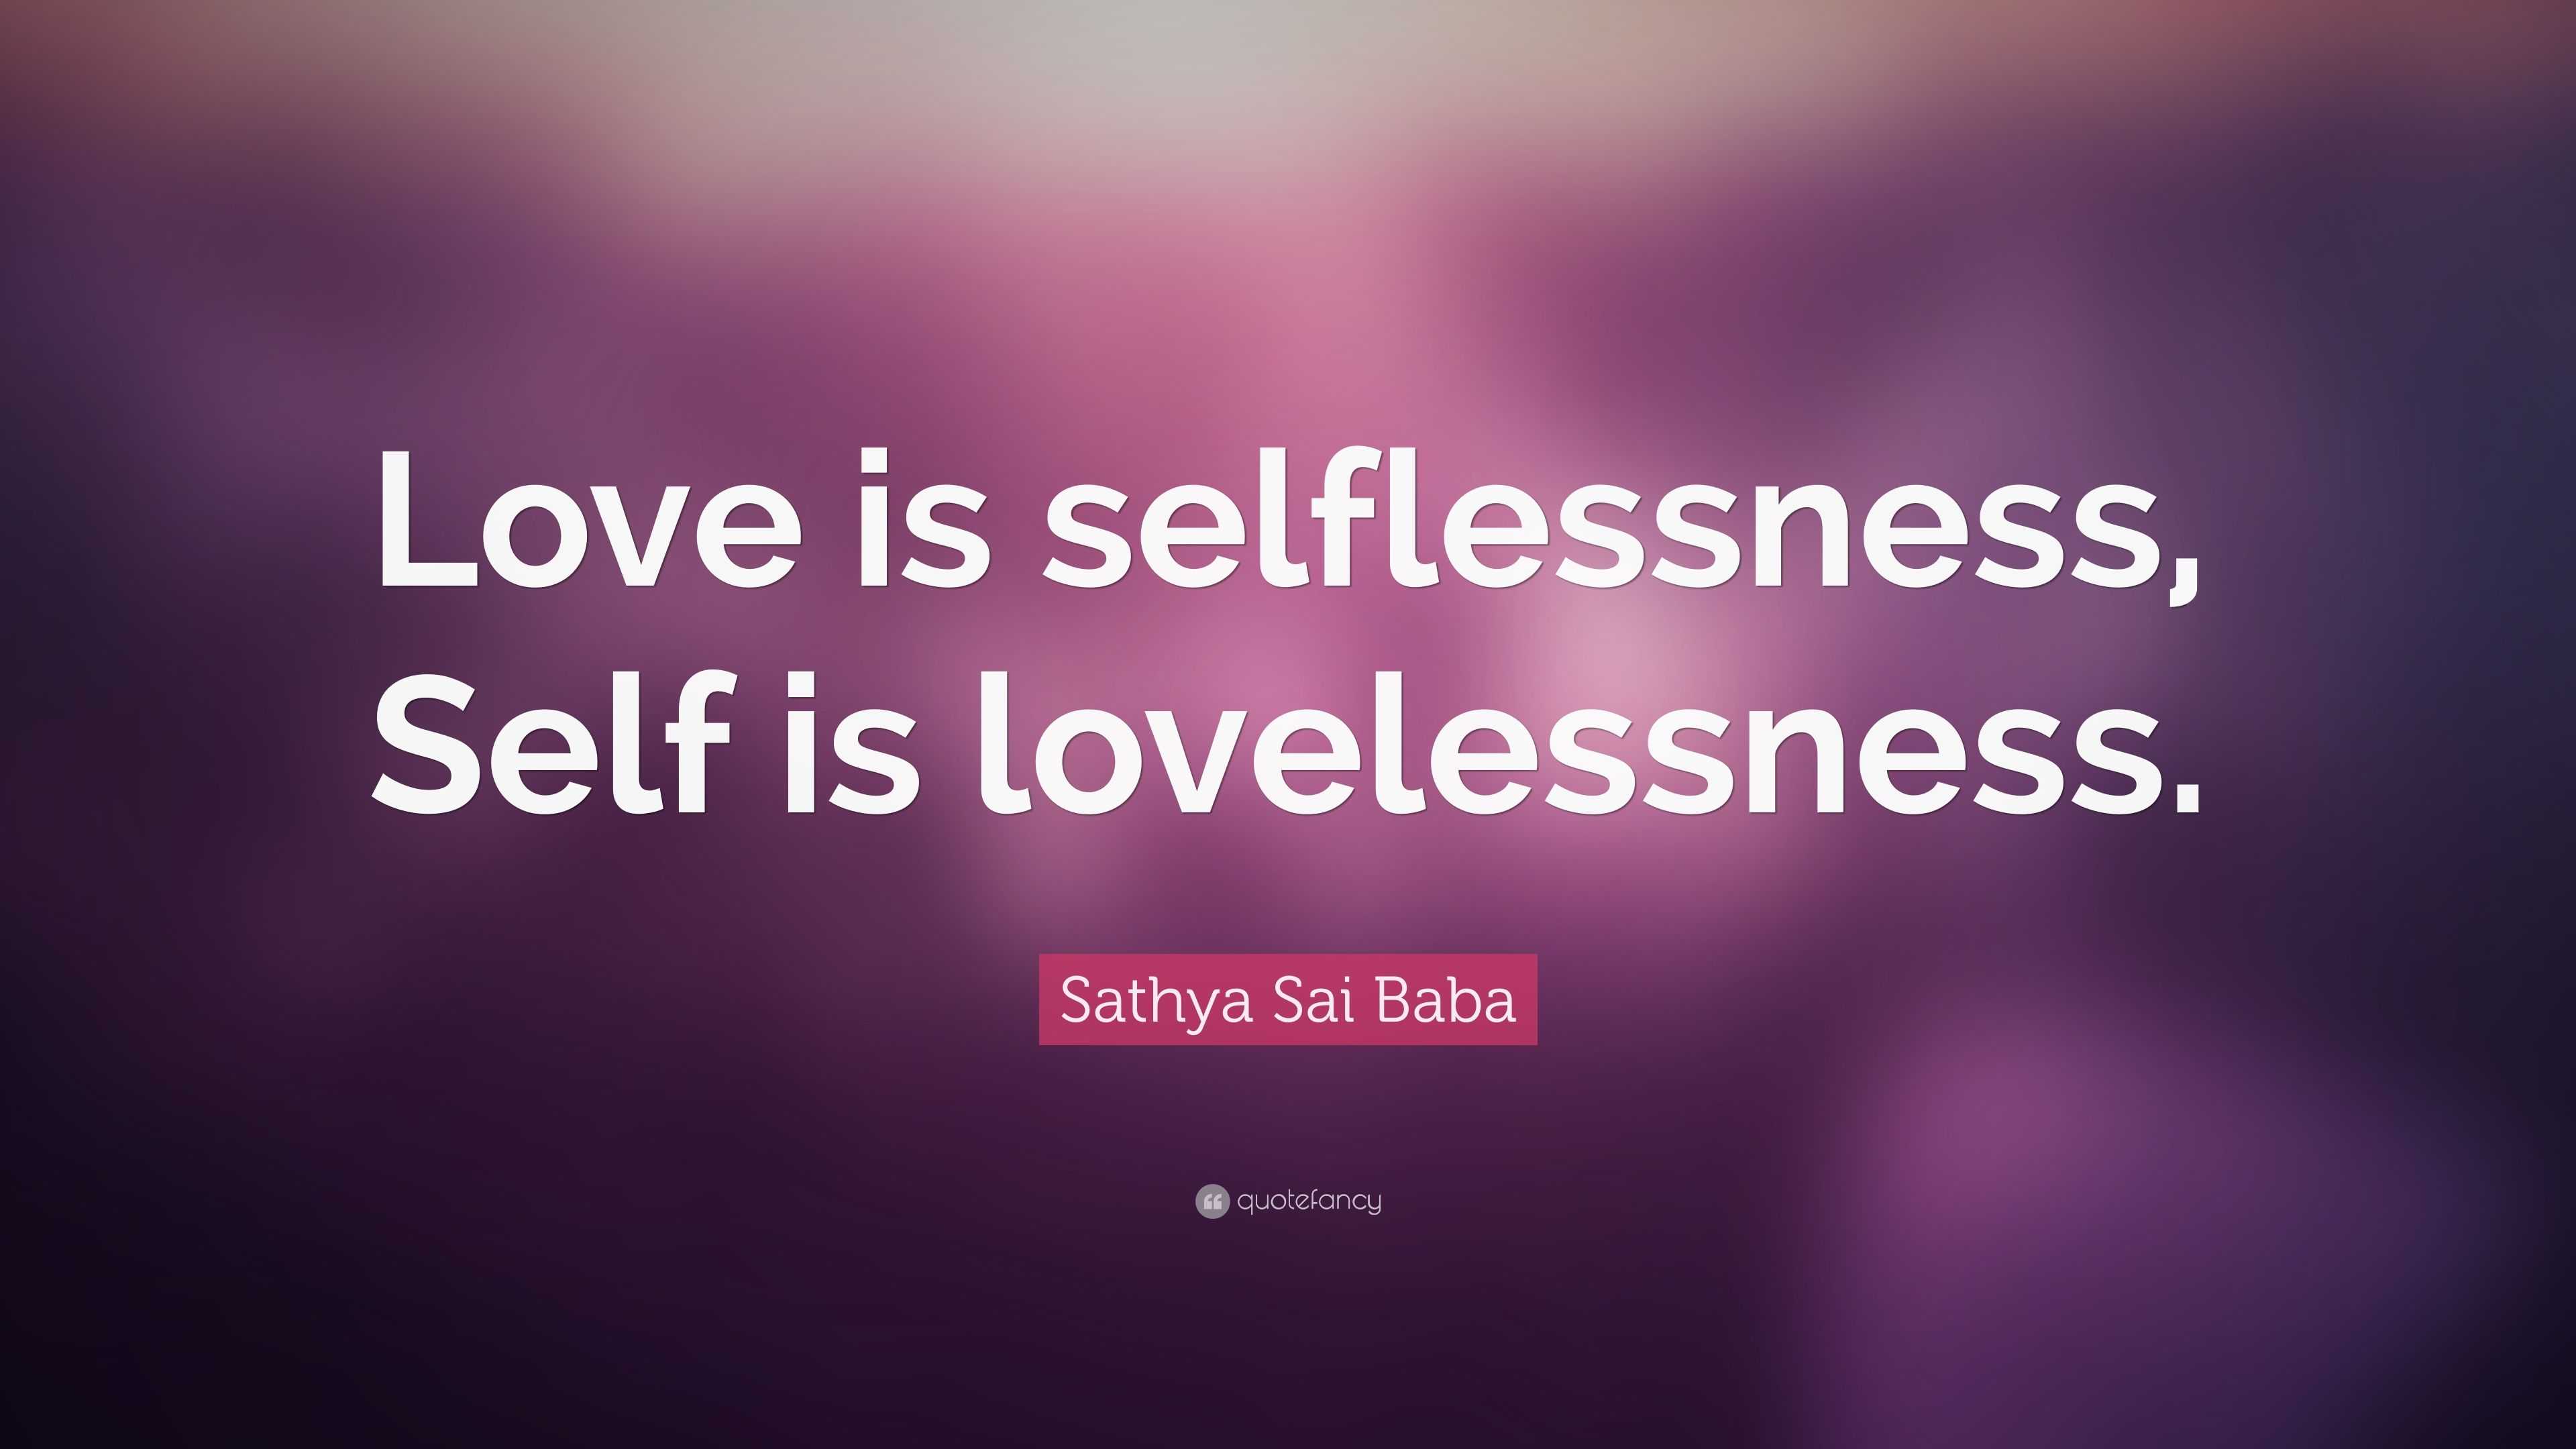 Sathya Sai Baba Quote: “Love is selflessness, Self is lovelessness.”